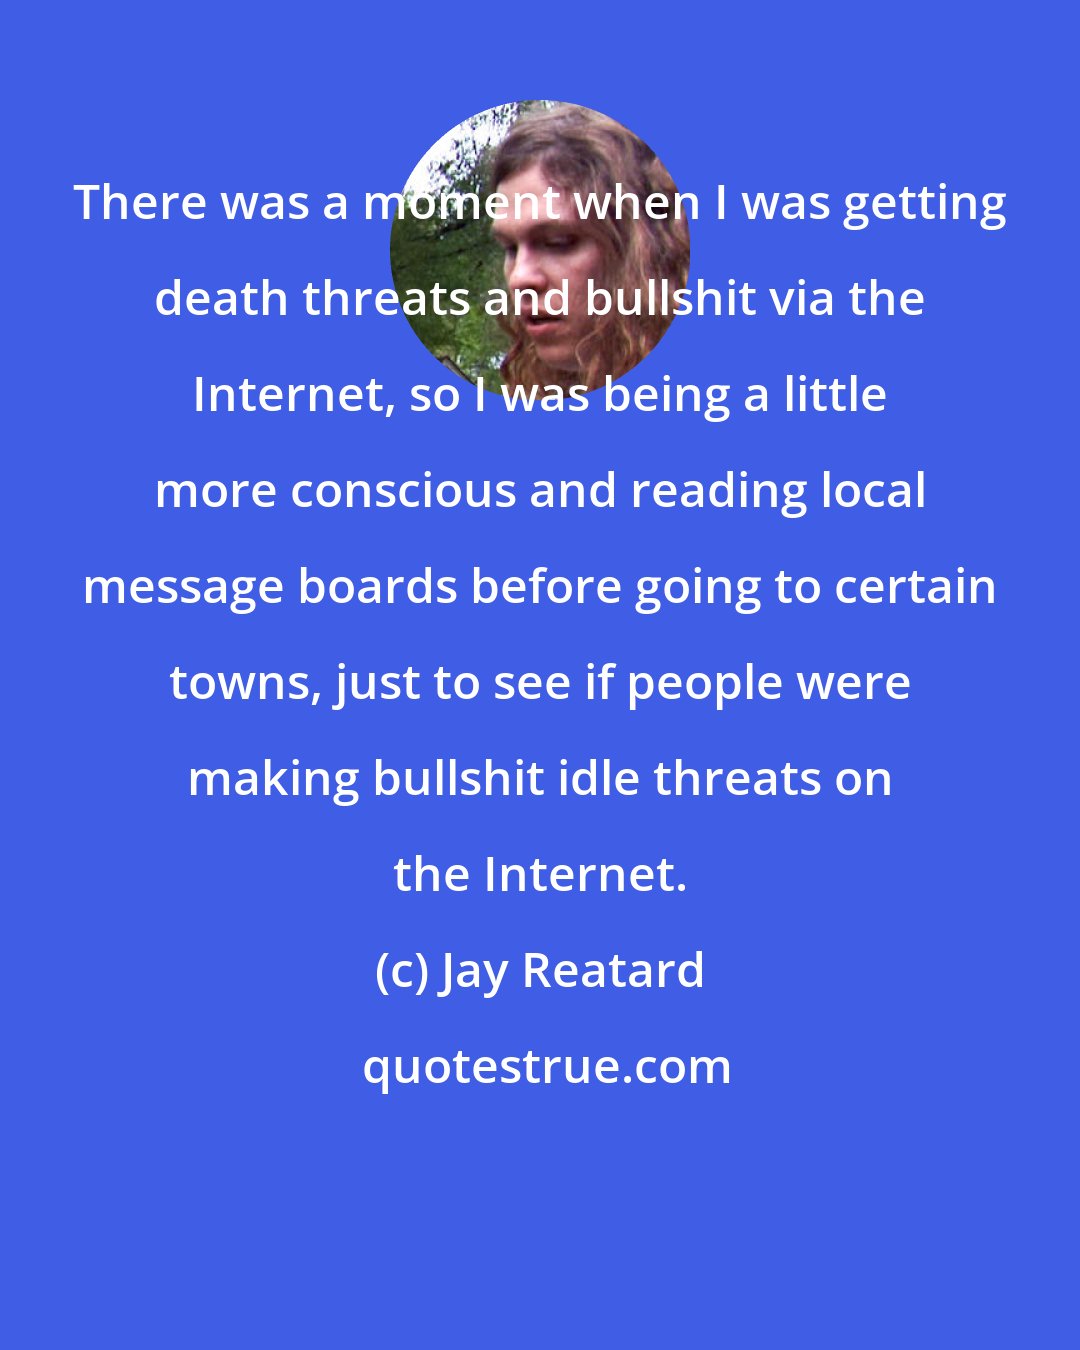 Jay Reatard: There was a moment when I was getting death threats and bullshit via the Internet, so I was being a little more conscious and reading local message boards before going to certain towns, just to see if people were making bullshit idle threats on the Internet.